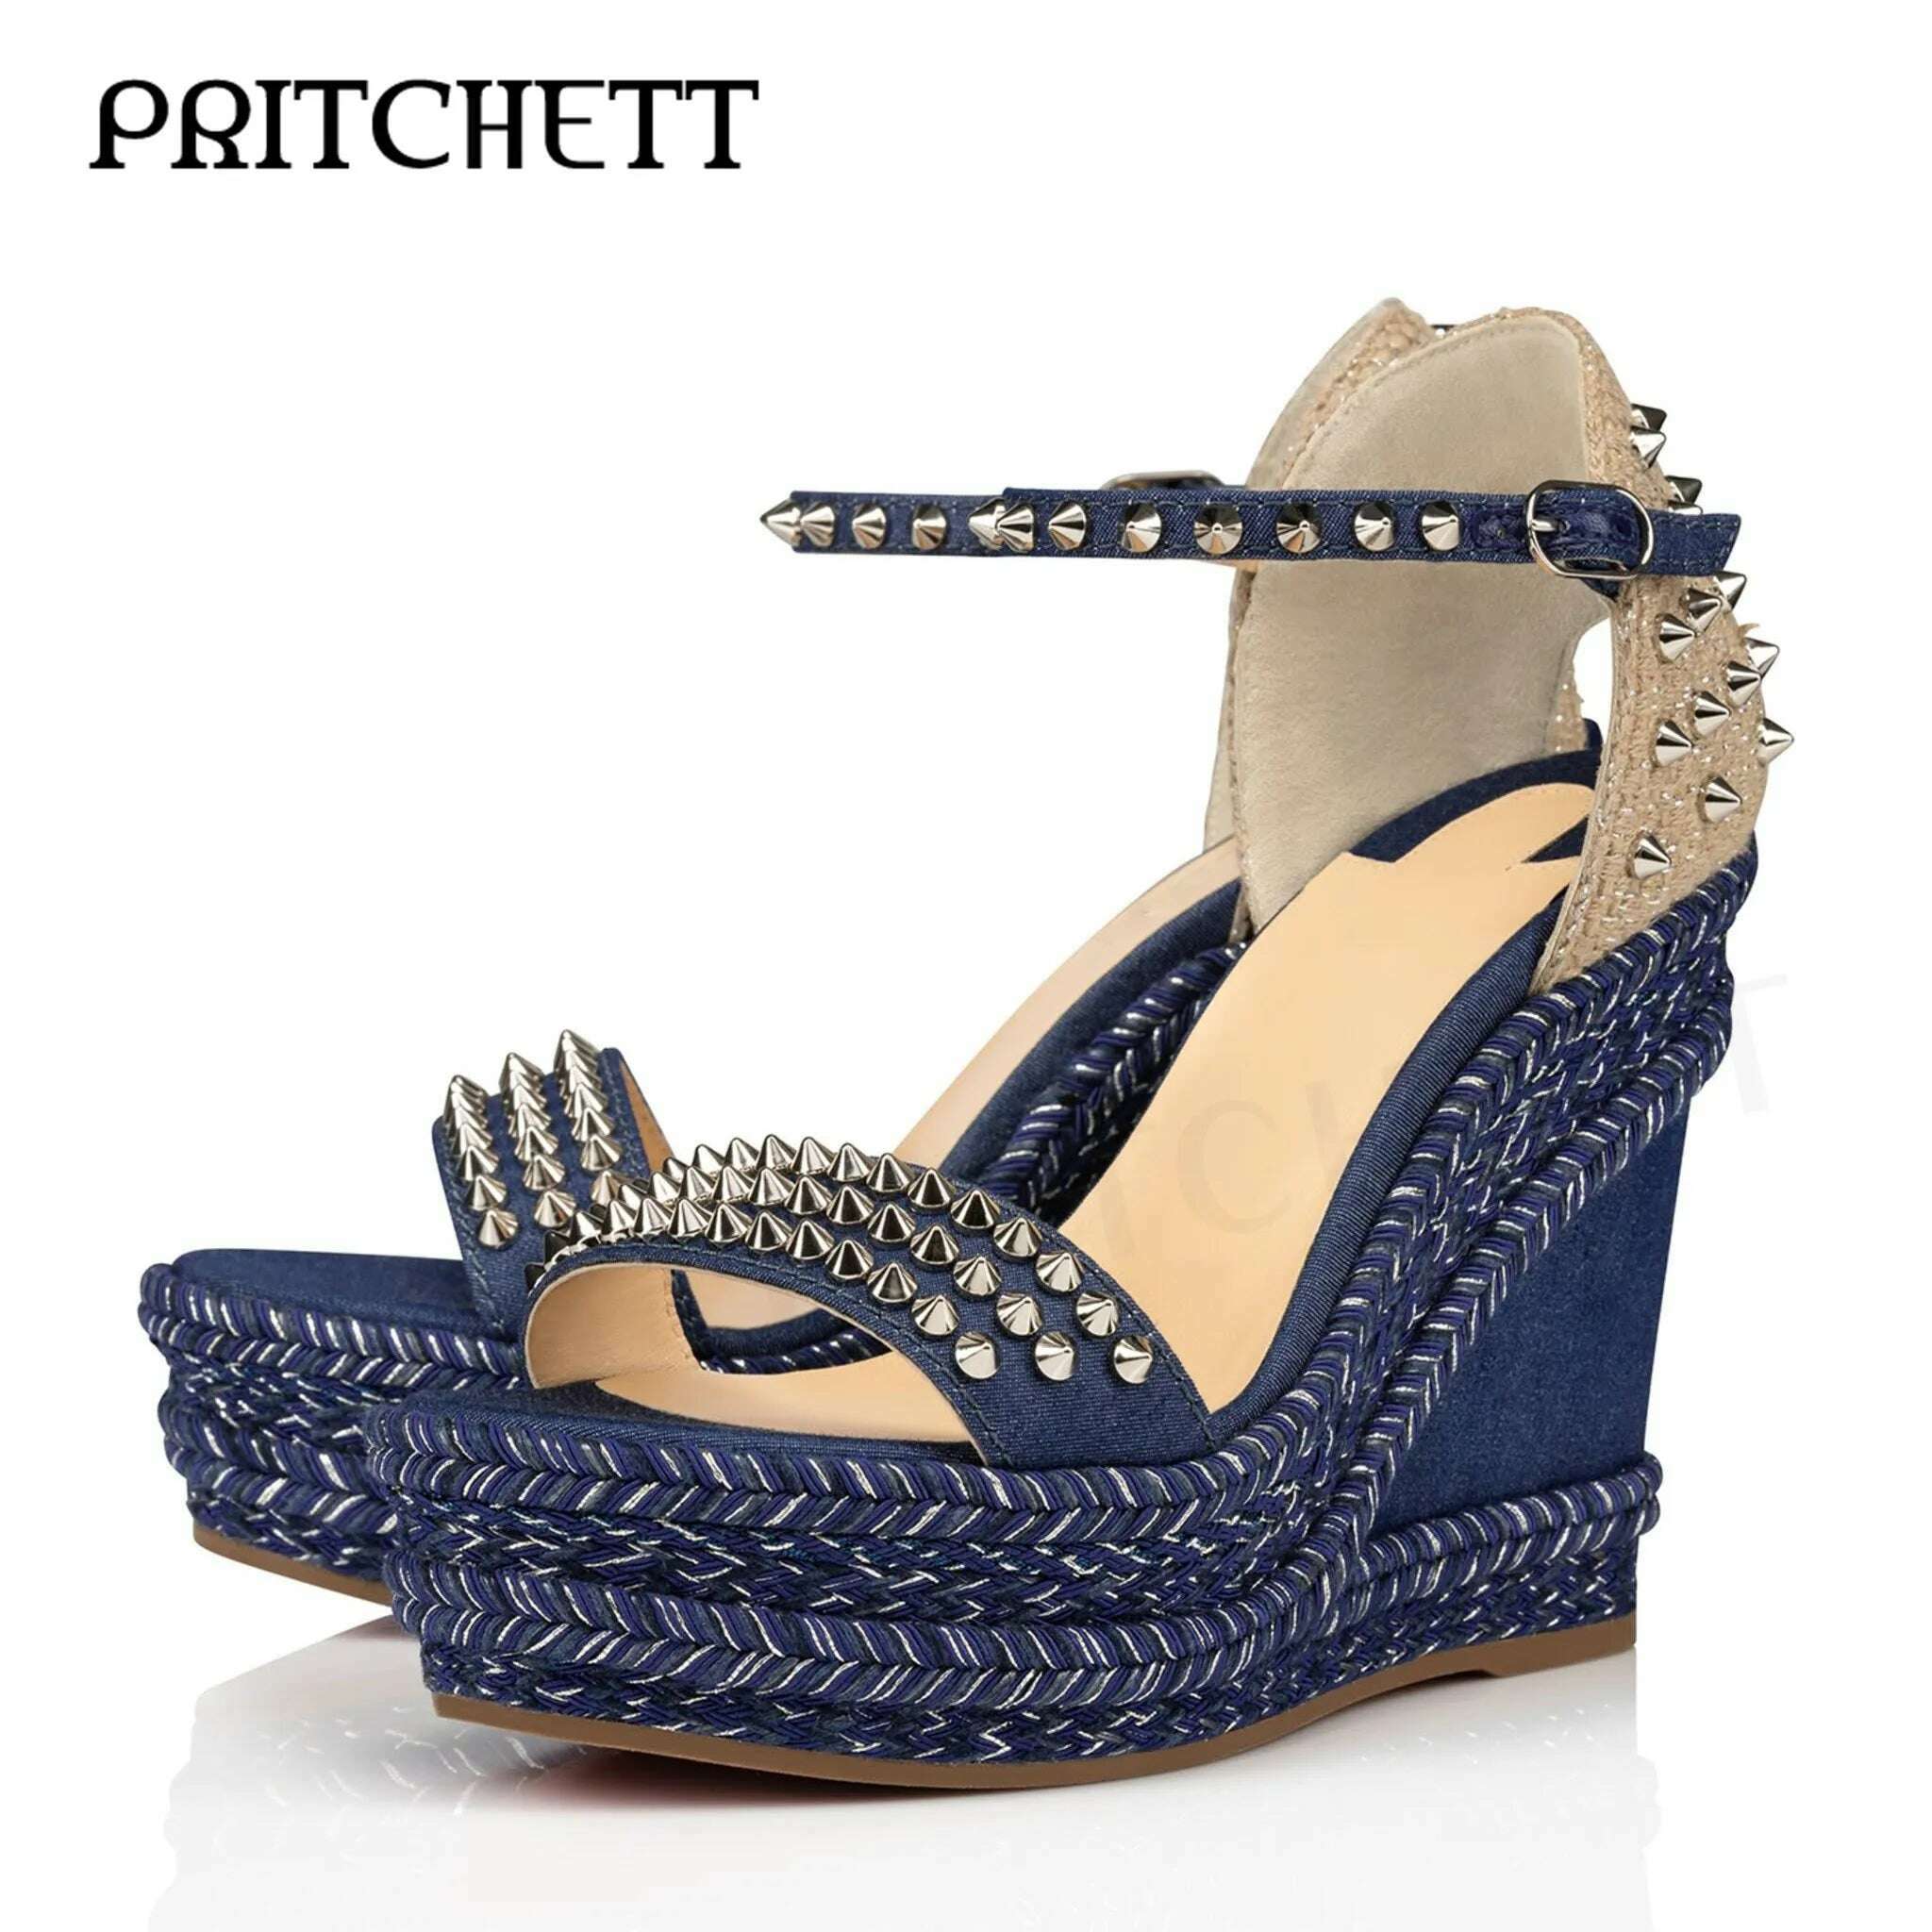 Blue Denim Woven Wedge Sandals Fashion Rivet Strap Open Toe High Heel Sandals Ankle Buckle Fashion Party Shoes for Women, As Picture-12.5cm 1 / 35, KIMLUD Women's Clothes